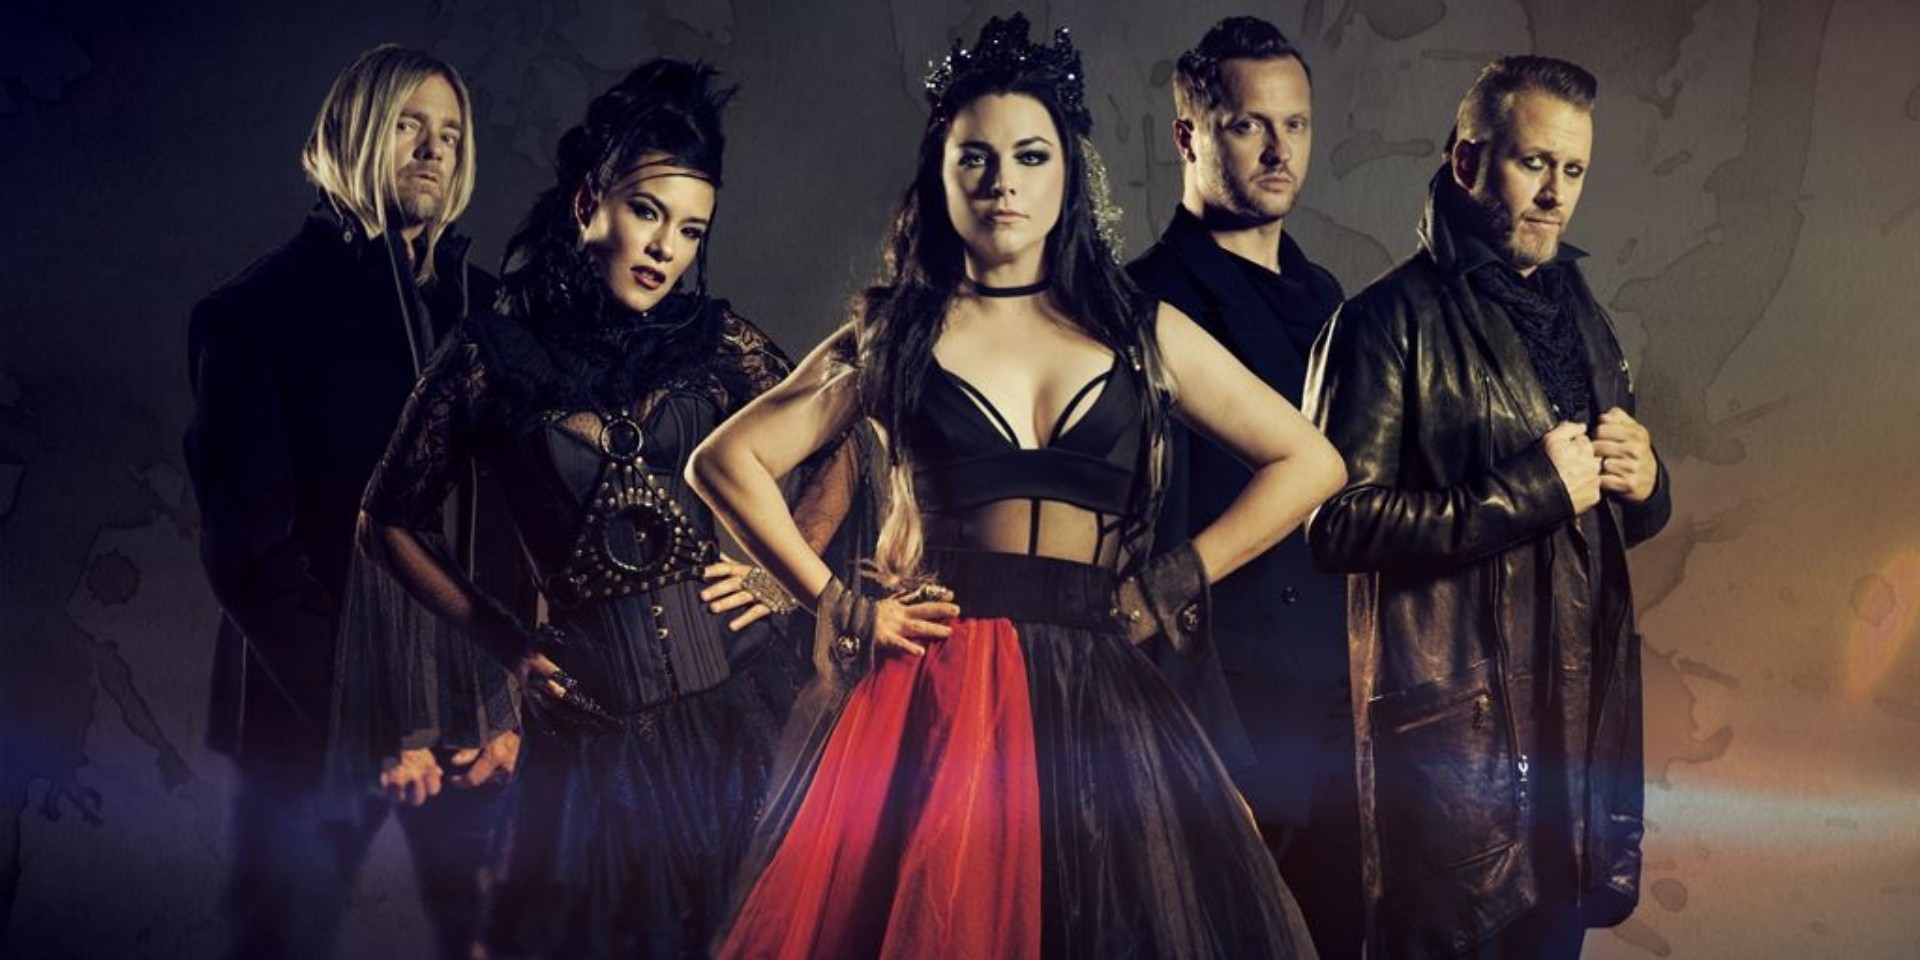 Amy Lee confirms Evanescence is working on new album